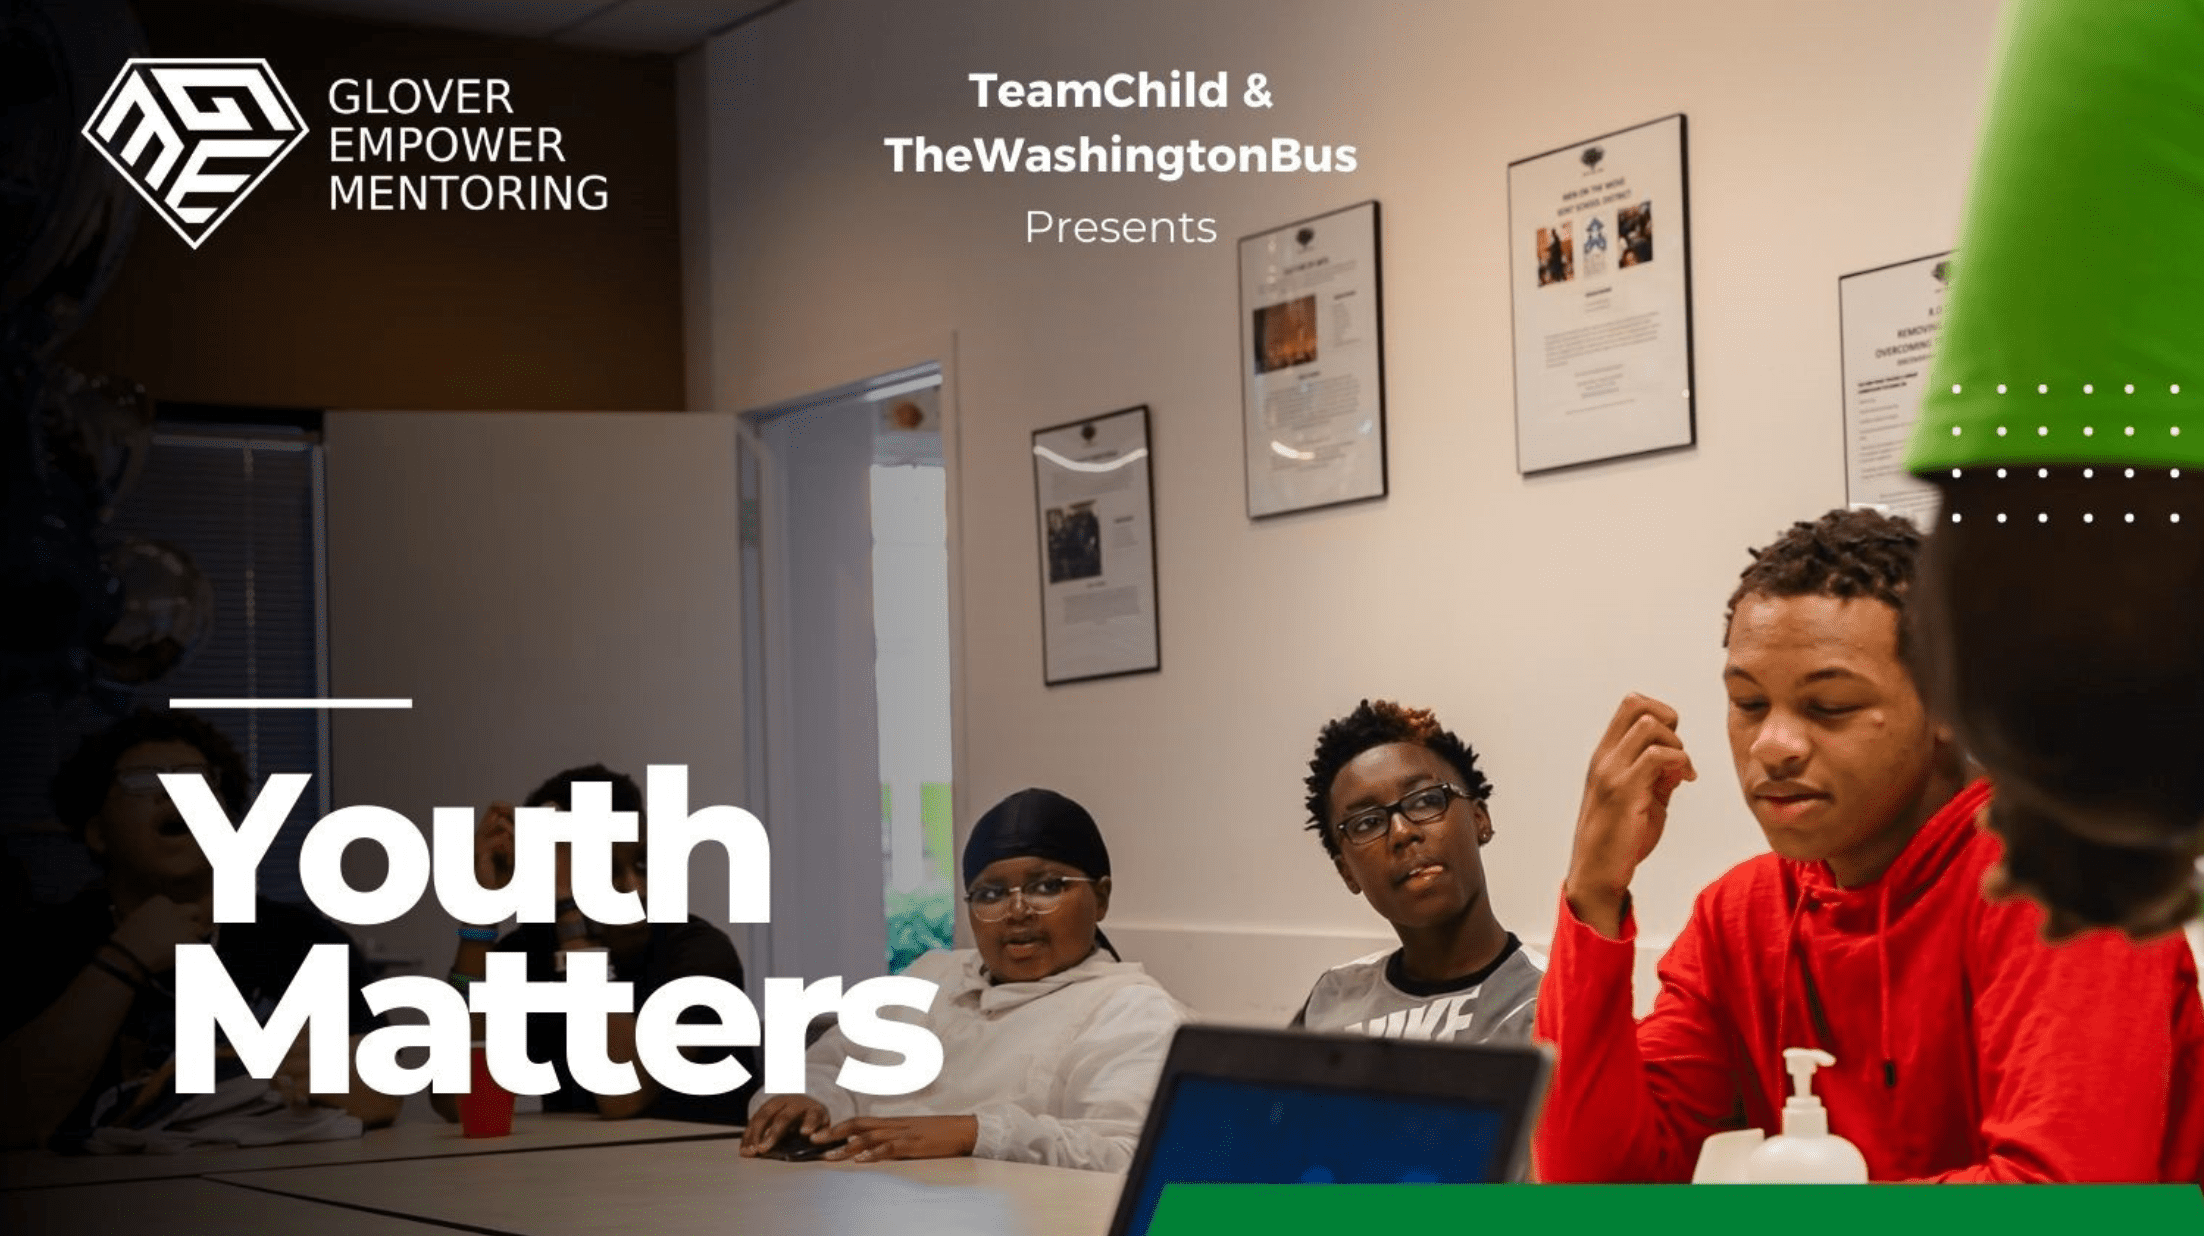 3 young people sit in a classroom listening to someone speaking. White text reads: Youth Matters. Logo for Glover Empower Mentoring appears in upper left corner.